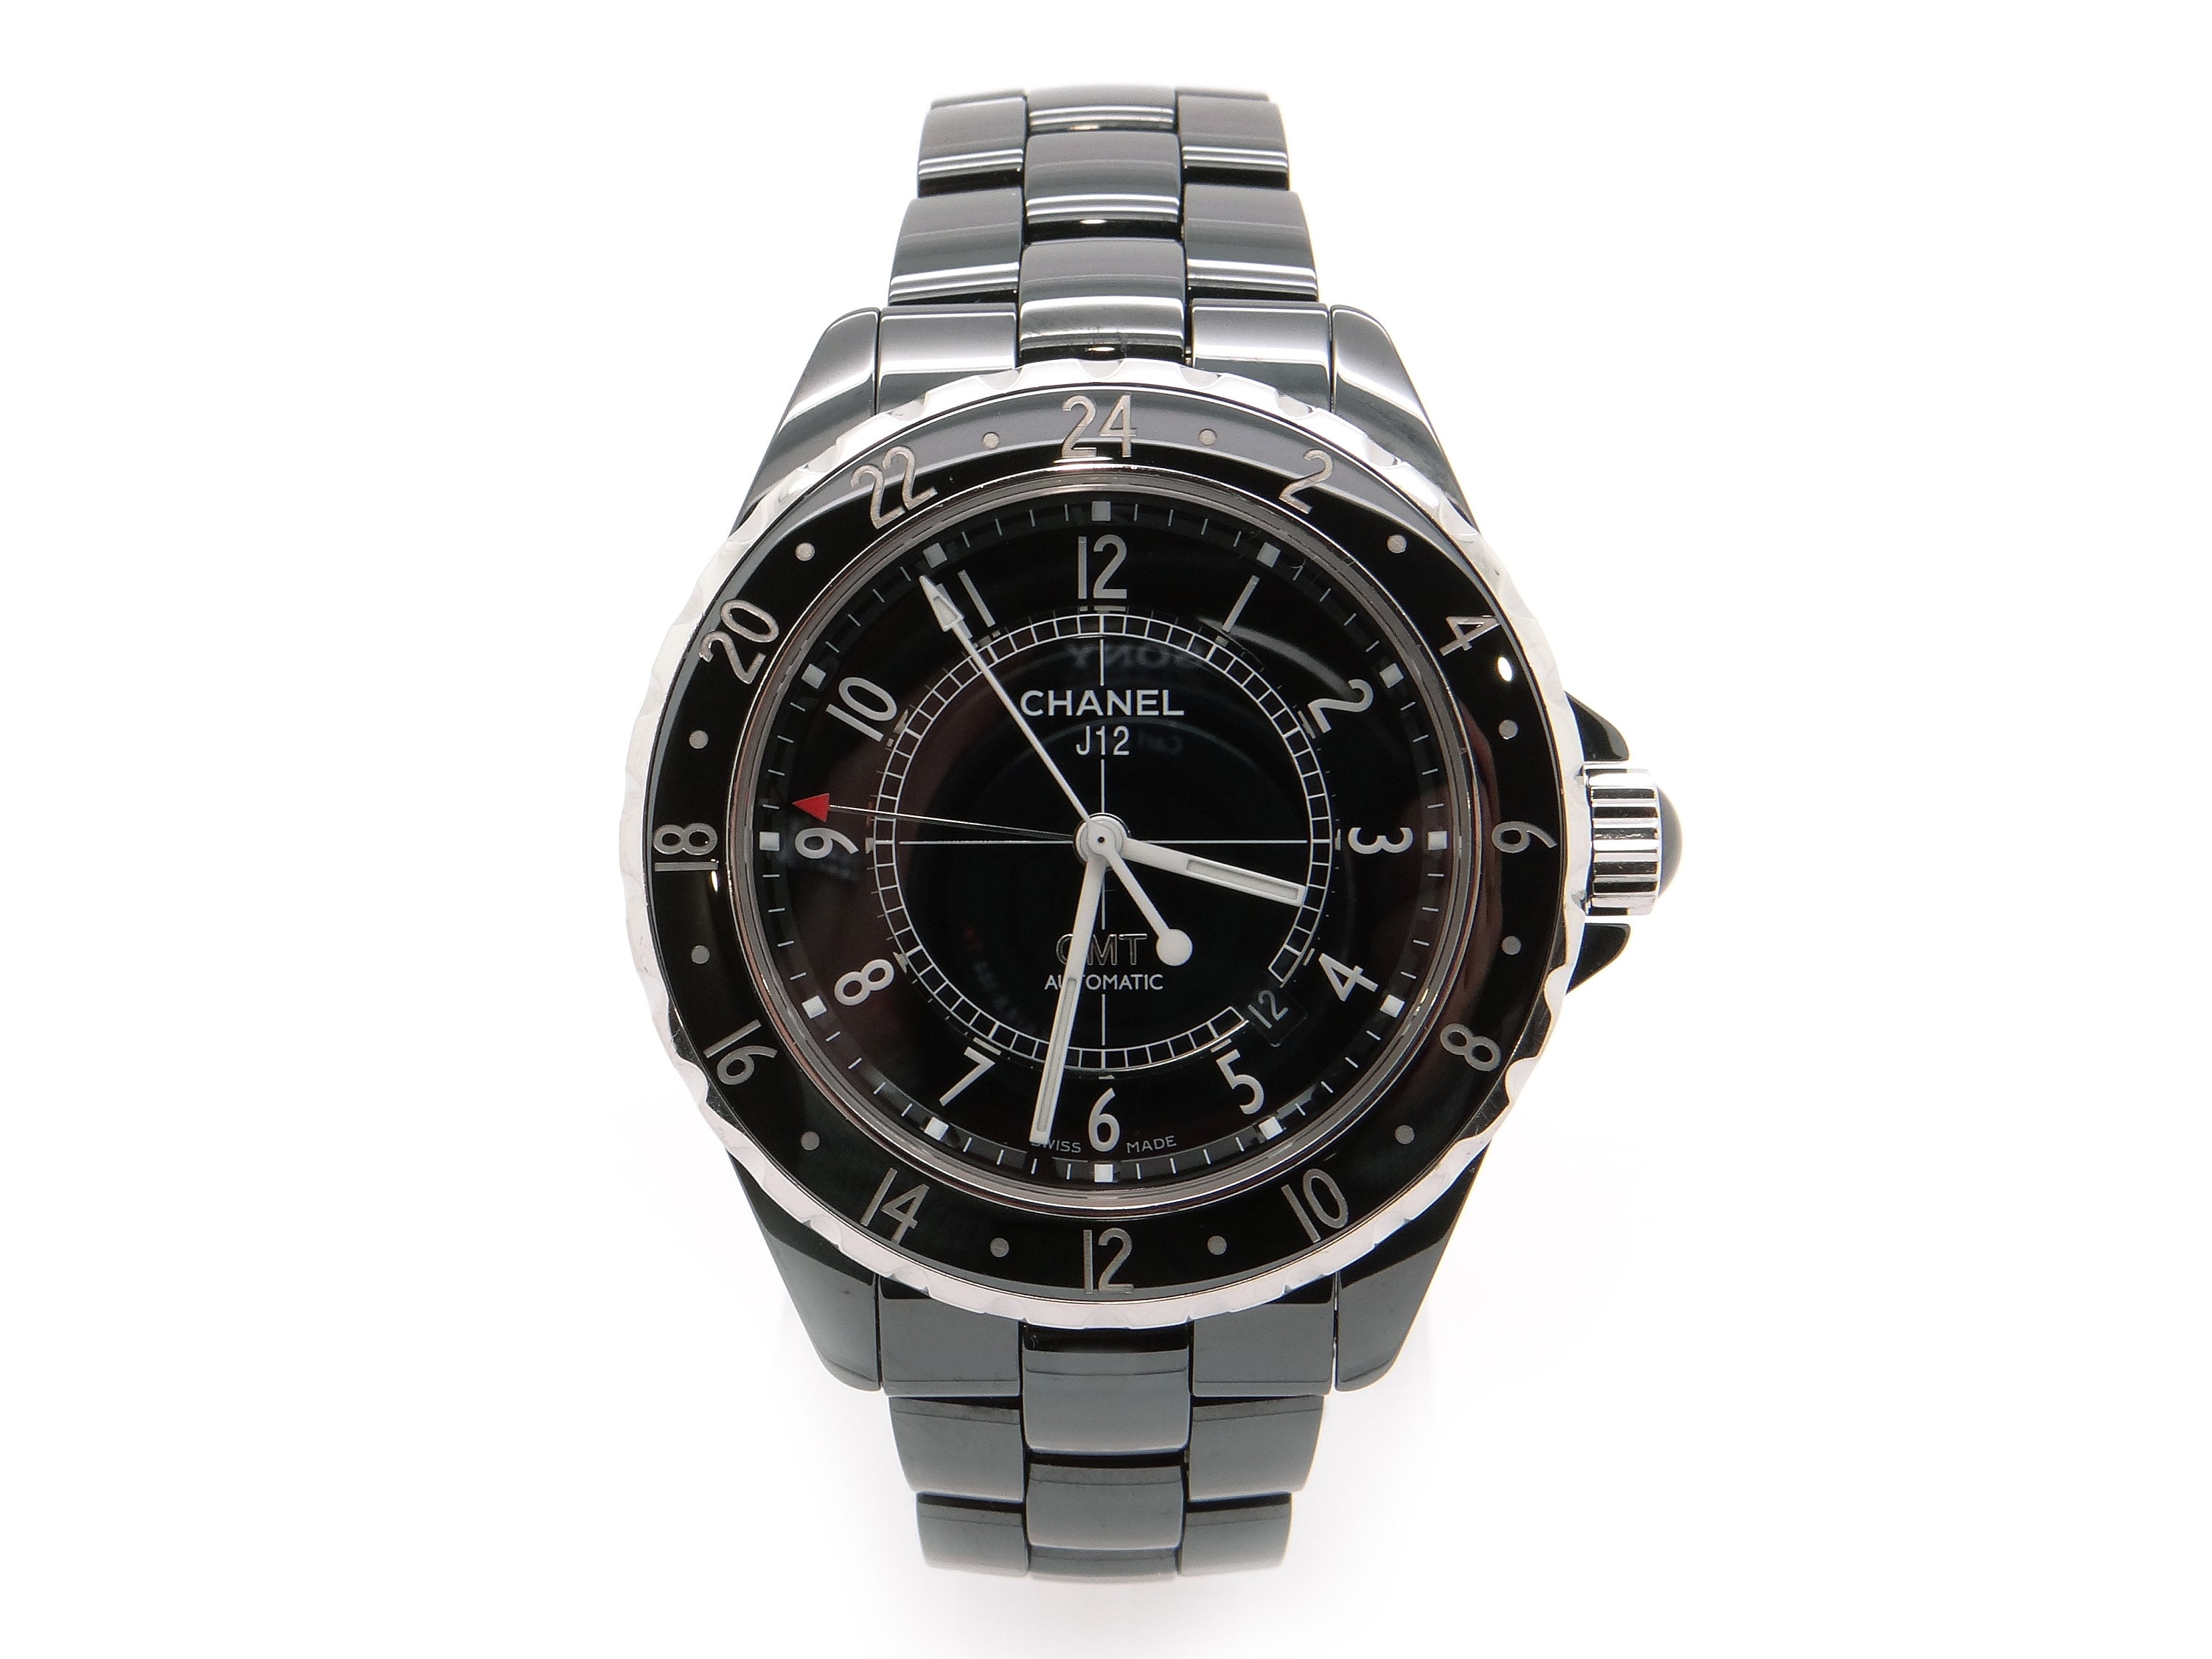 Pre-owned Watches - Cyber Week Sale - Jomashop